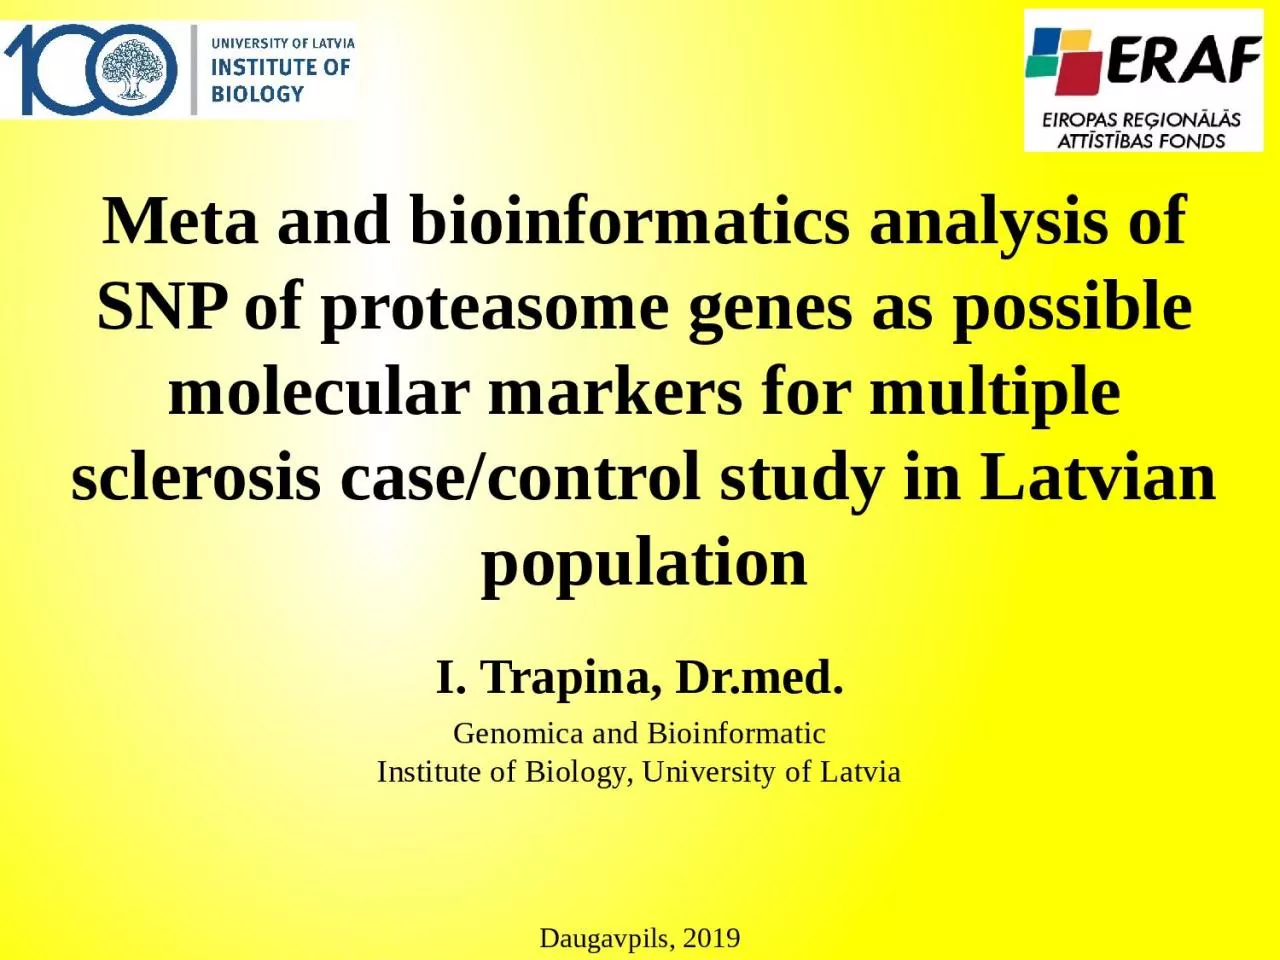 Meta and bioinformatics analysis of SNP of proteasome genes as possible molecular markers